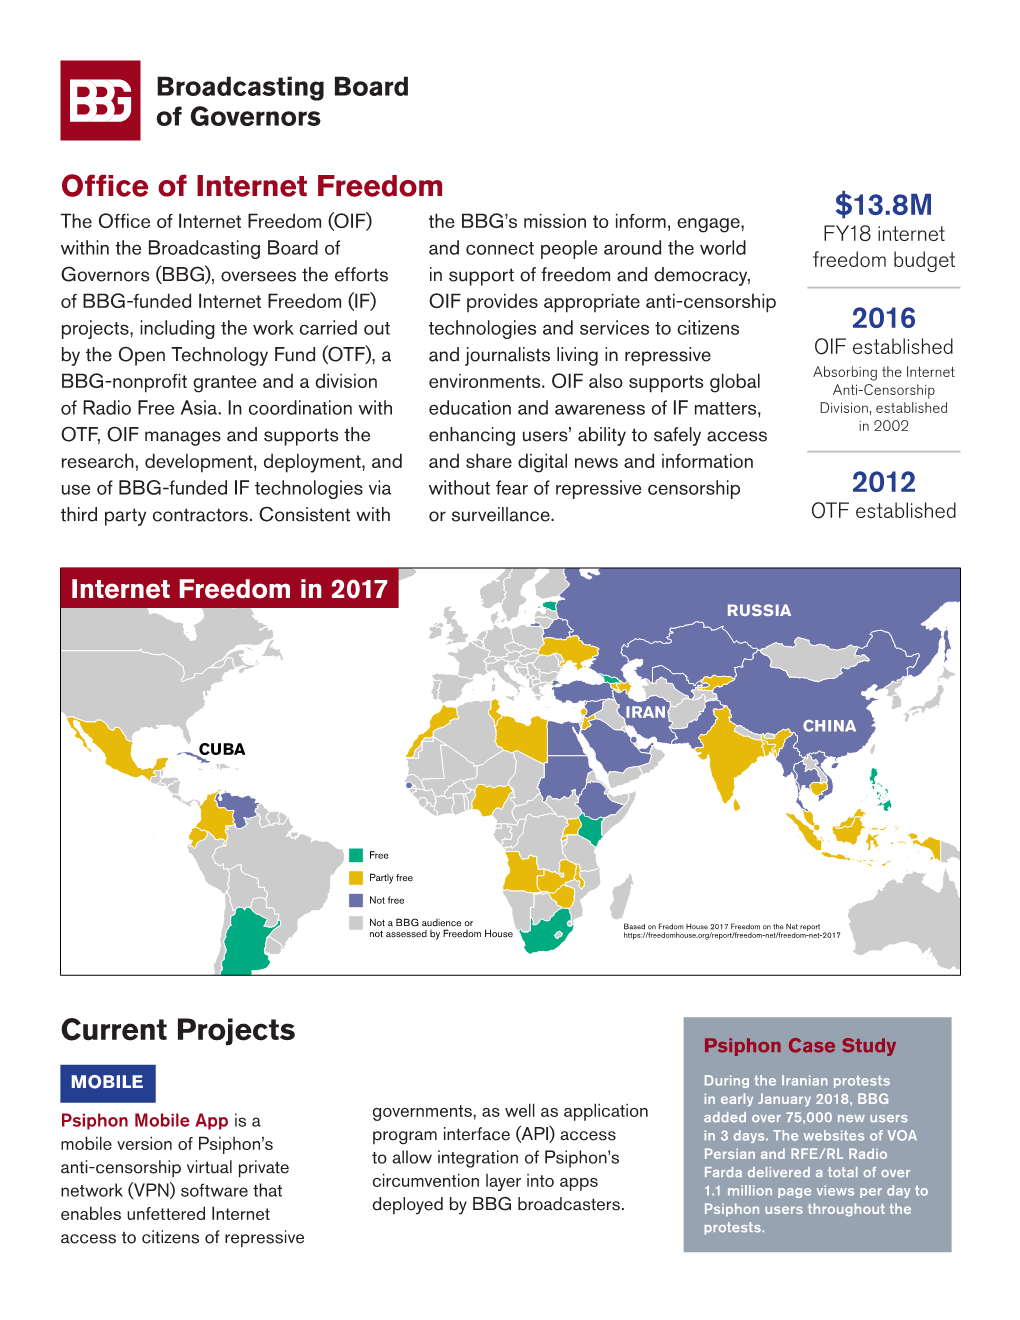 Office of Internet Freedom $13.8M 2016 2012 Current Projects